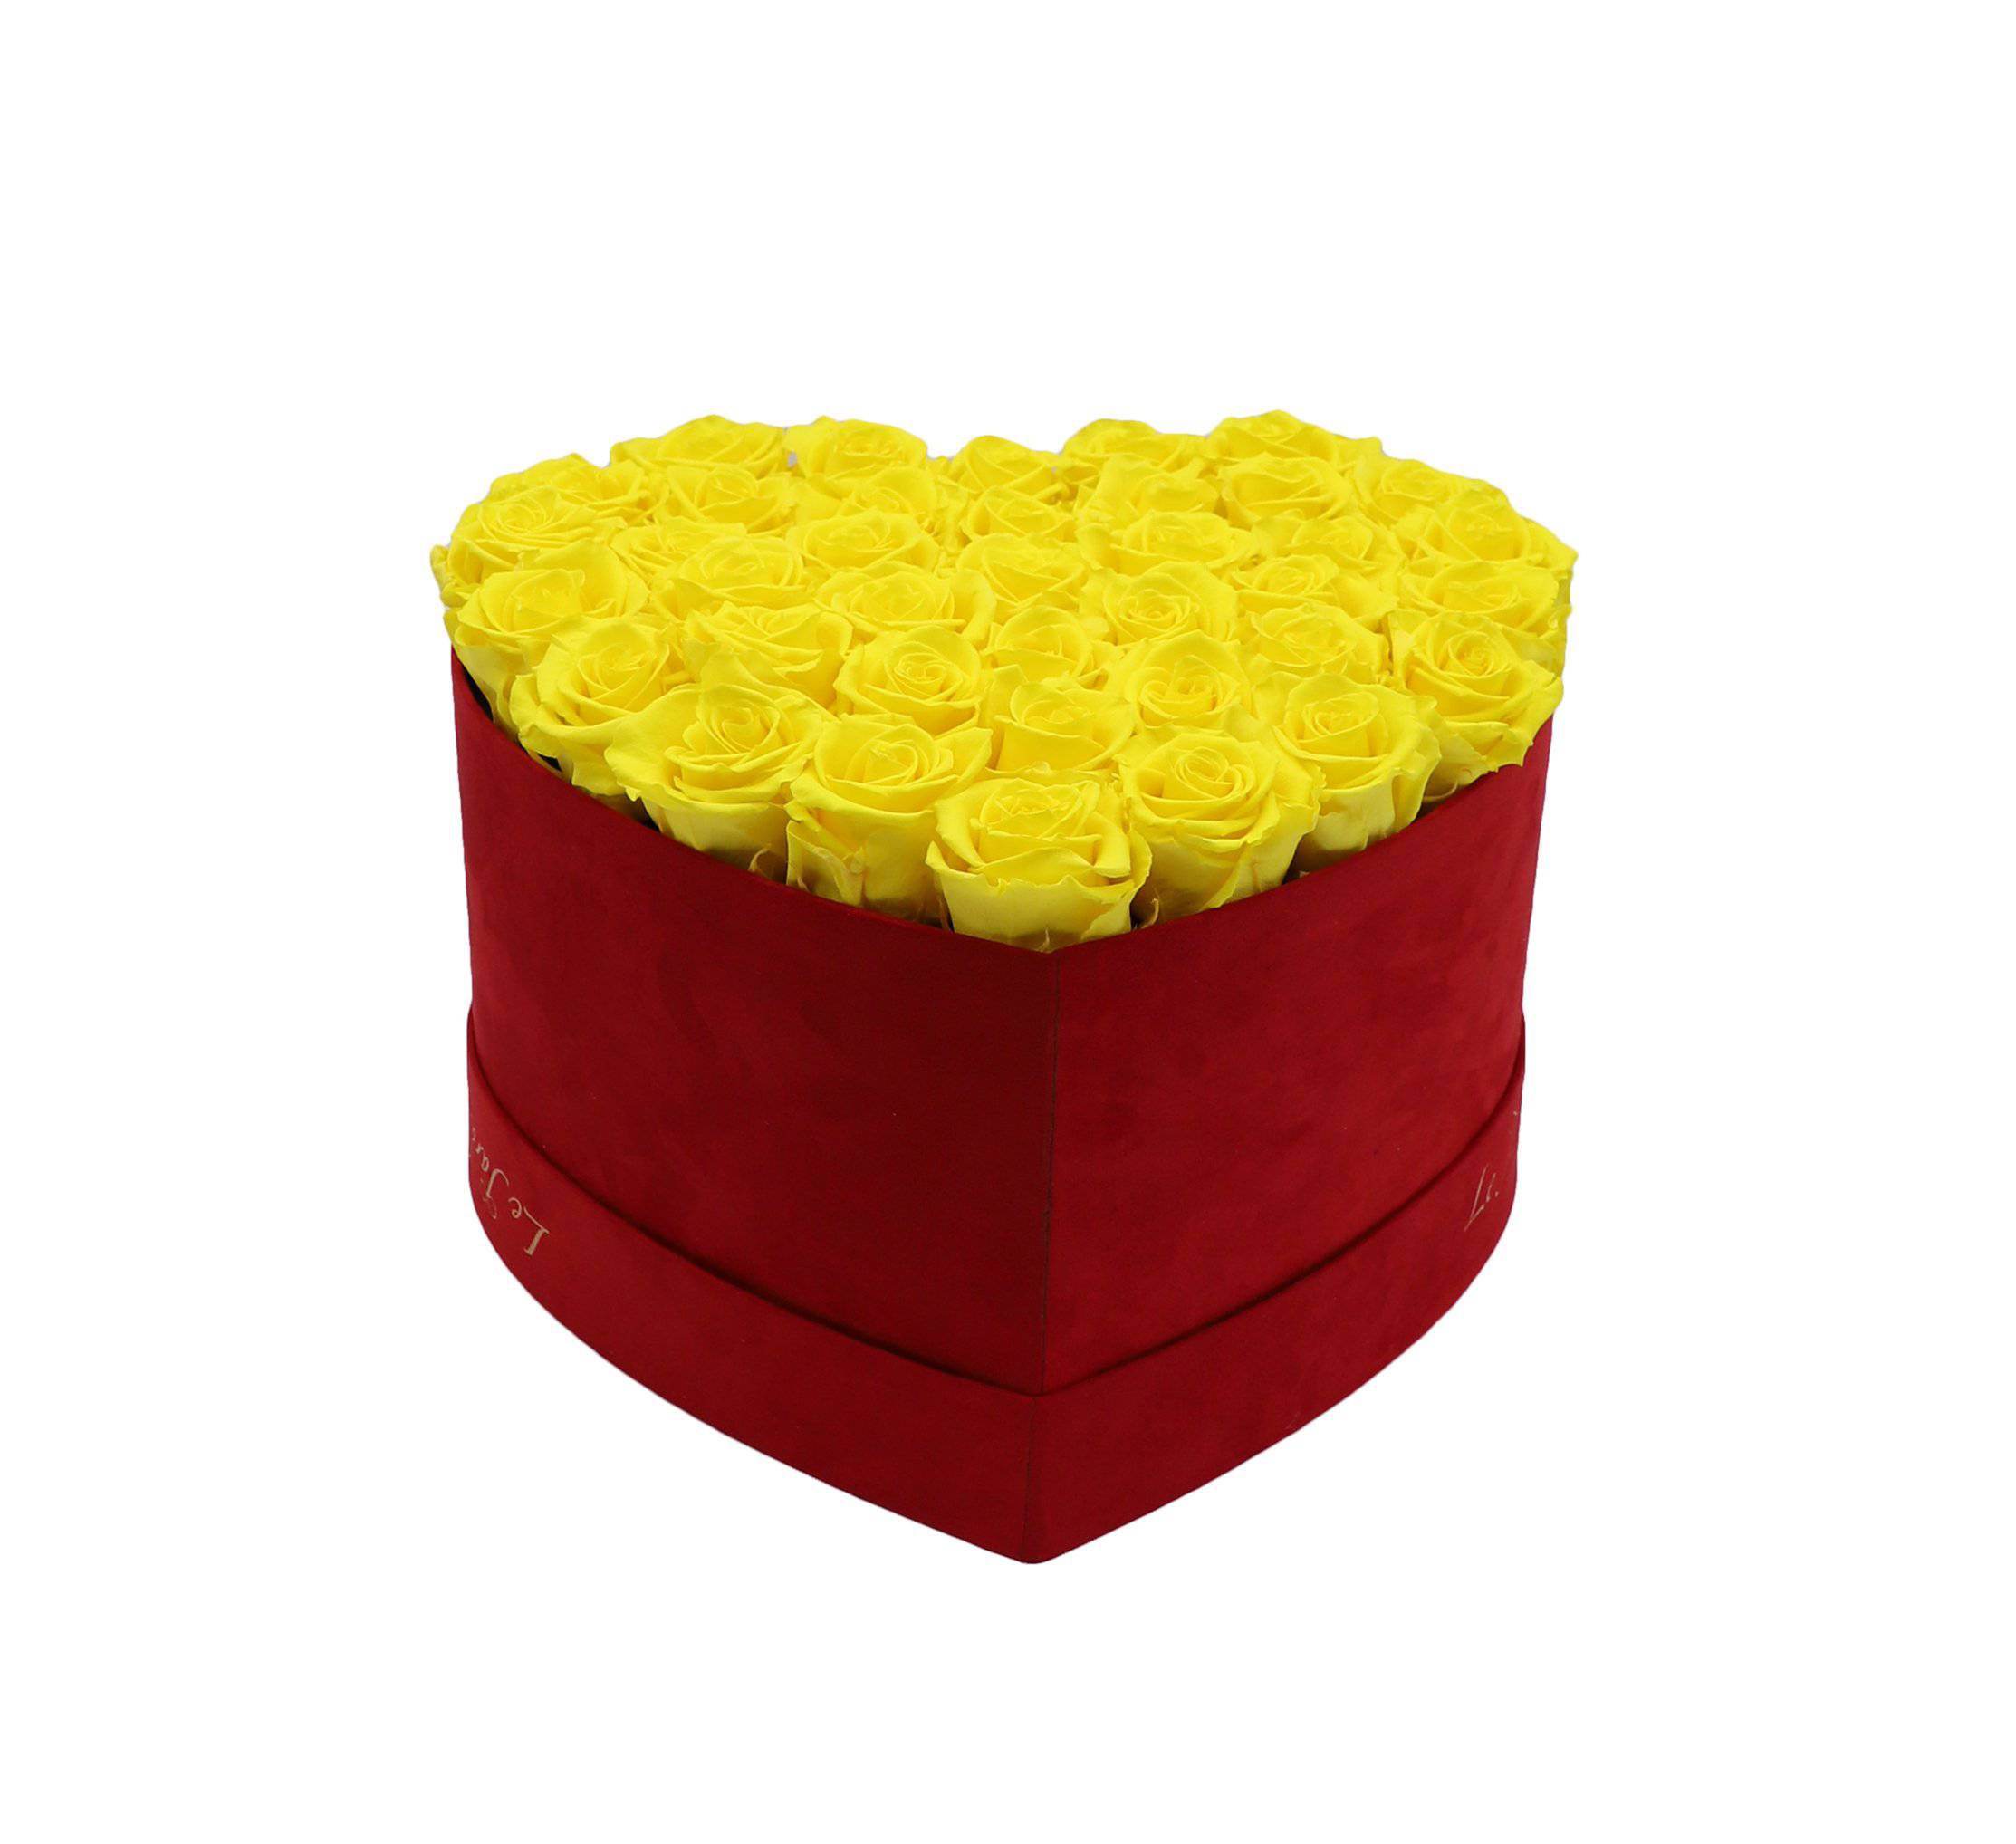 Yellow Preserved Roses in A Heart Shaped Box- Small Heart Luxury Red Suede Box - Le Jardin Infini Roses in a Box